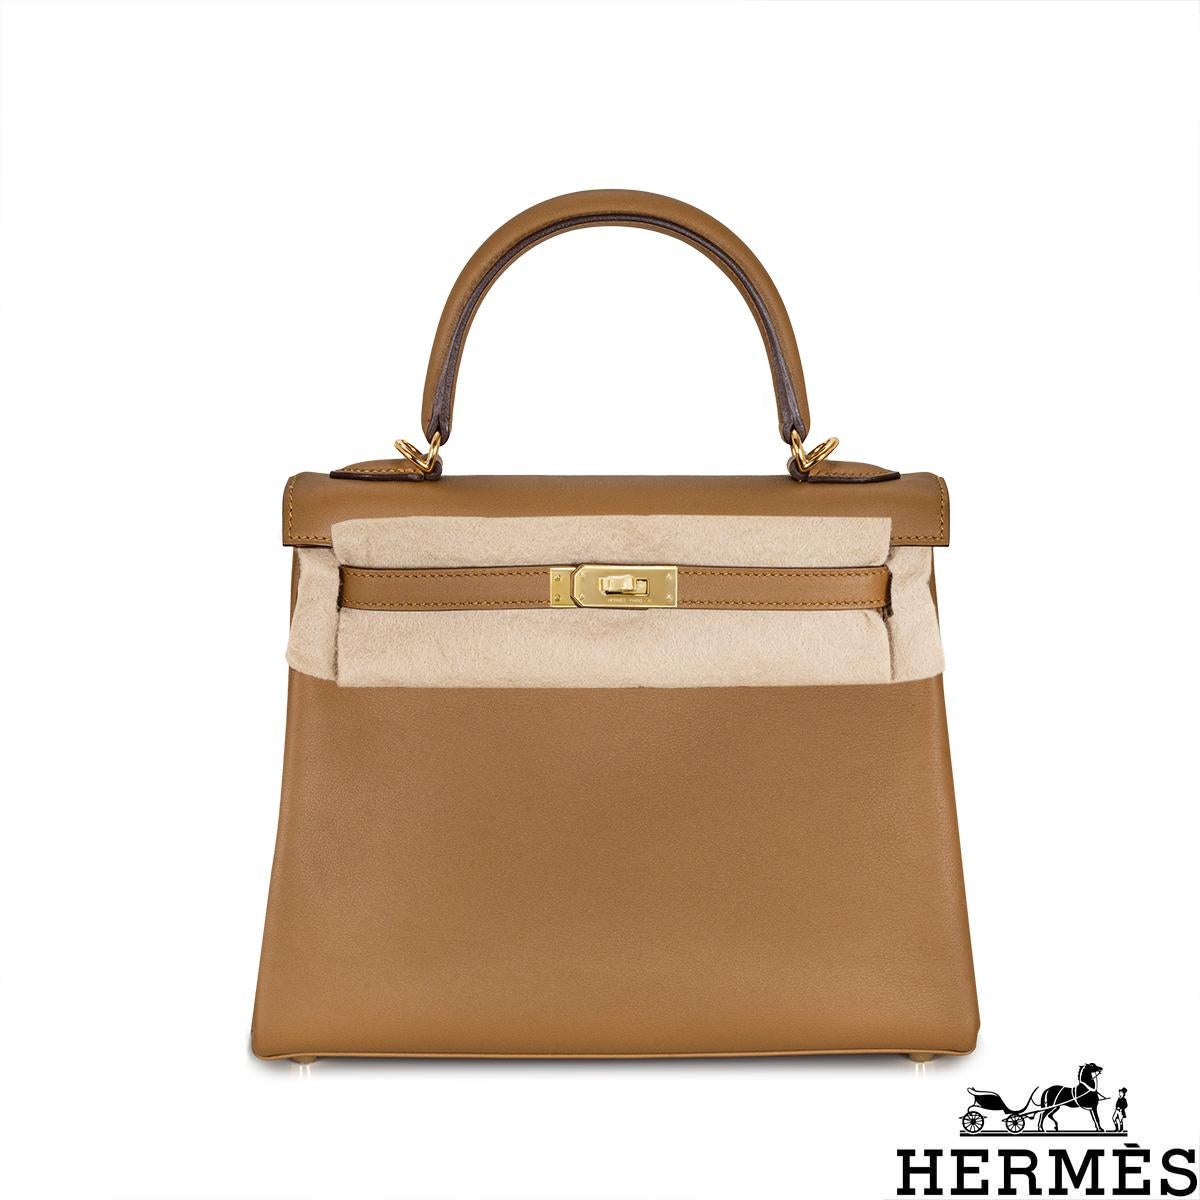 A lovely Hermès 25cm Kelly bag. The exterior of this Kelly is crafted in Bronze Dore Swift leather, is complemented with gold-tone hardware and tonal stitching. It features a front toggle closure with two straps, a single rolled handle and a